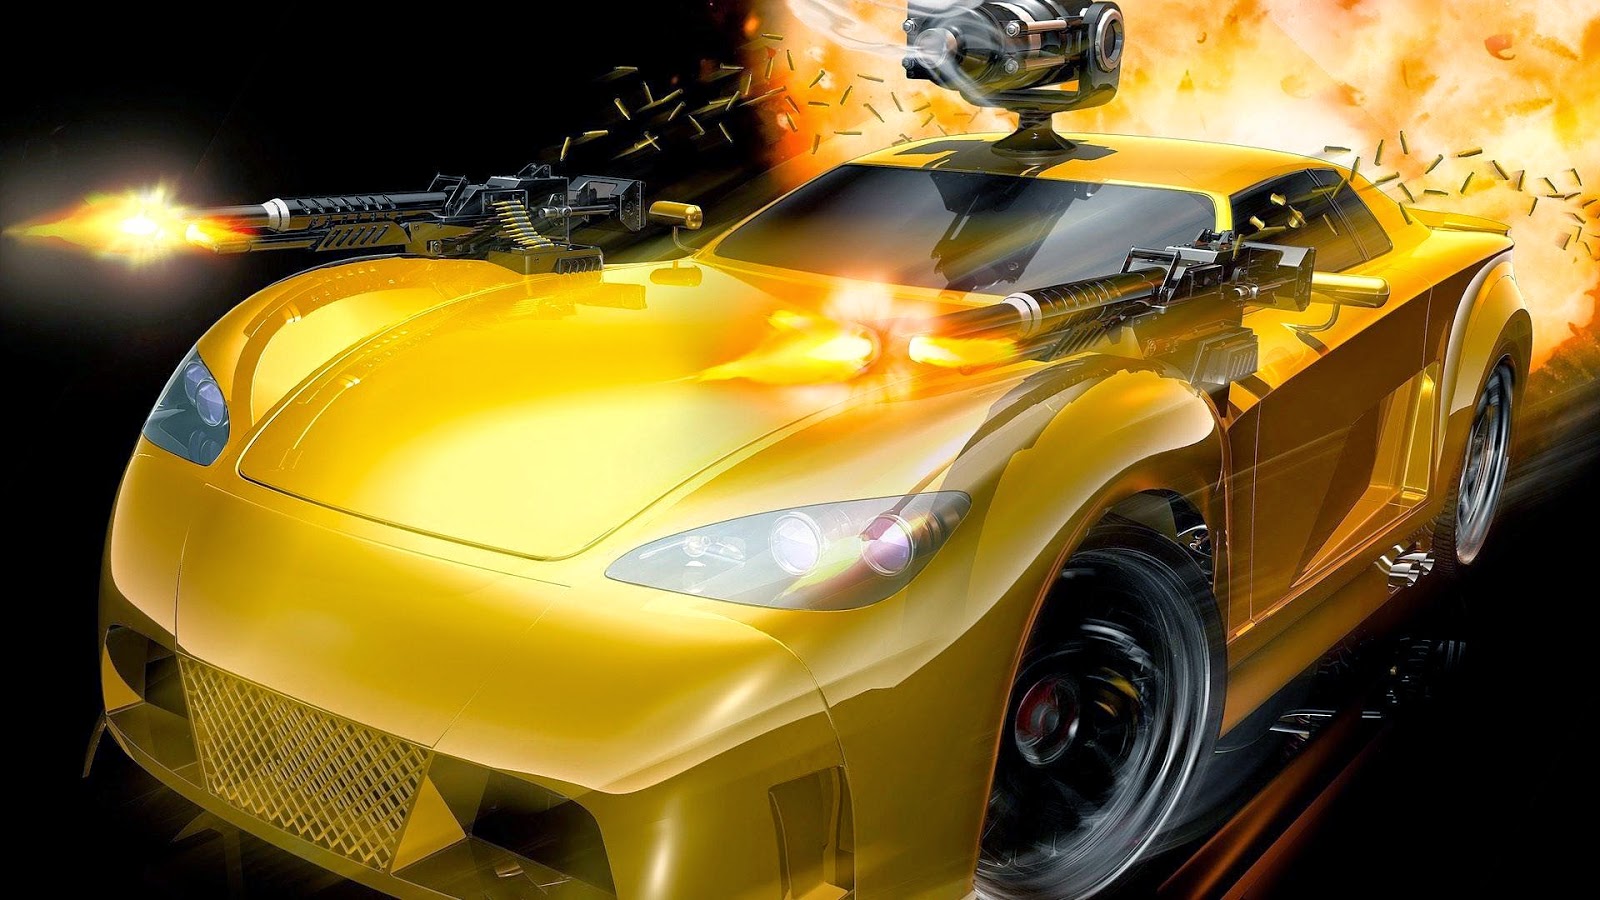 Yellow Car Game Wallpaper Under Games - HD Wallpapers ...